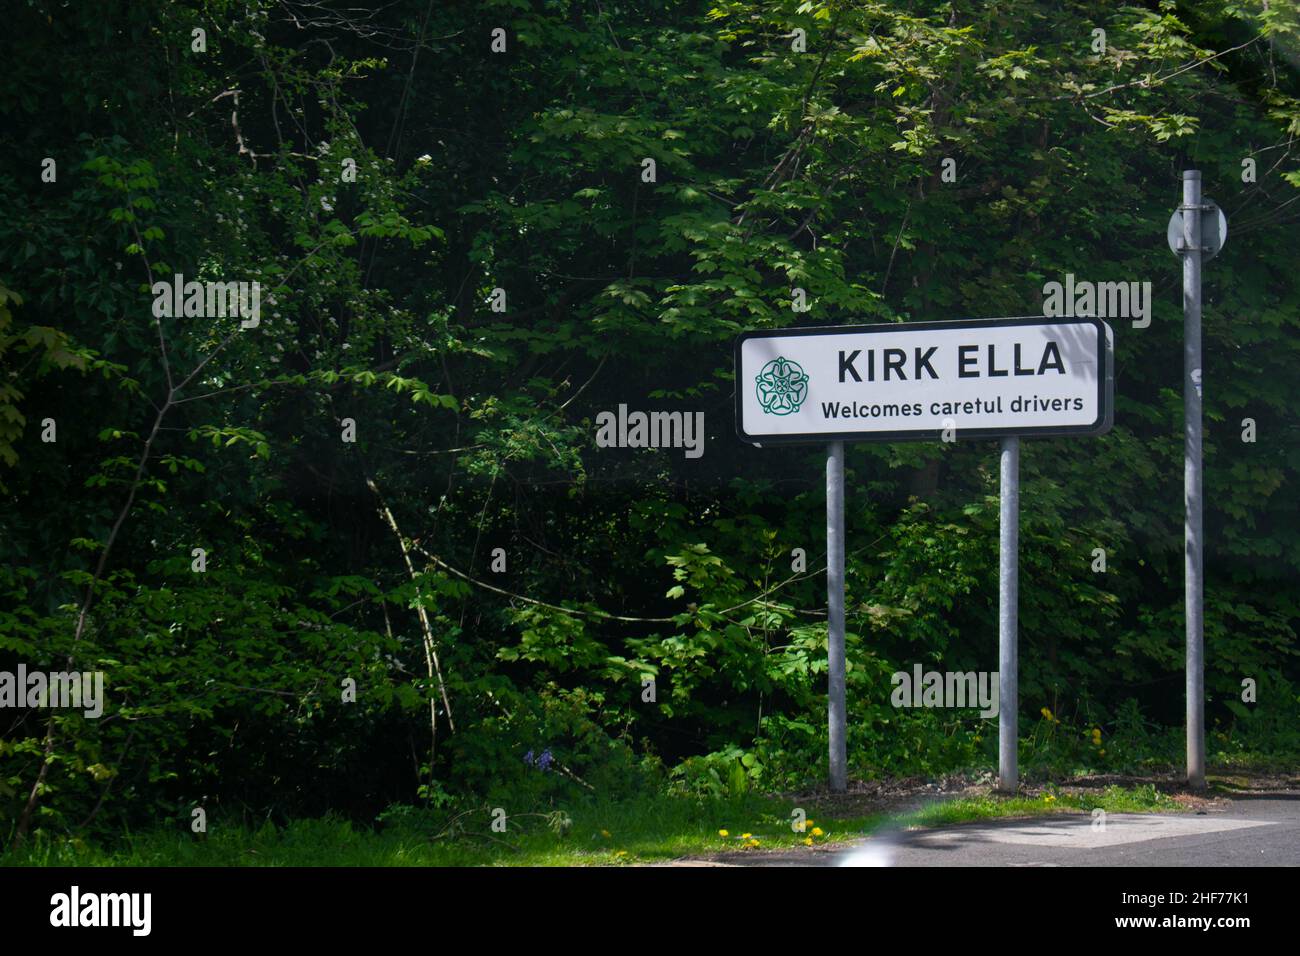 Road sign on street directing to Kirk Ella in Kingston upon Hull, East Yorkshire (City of Culture 2017) Stock Photo